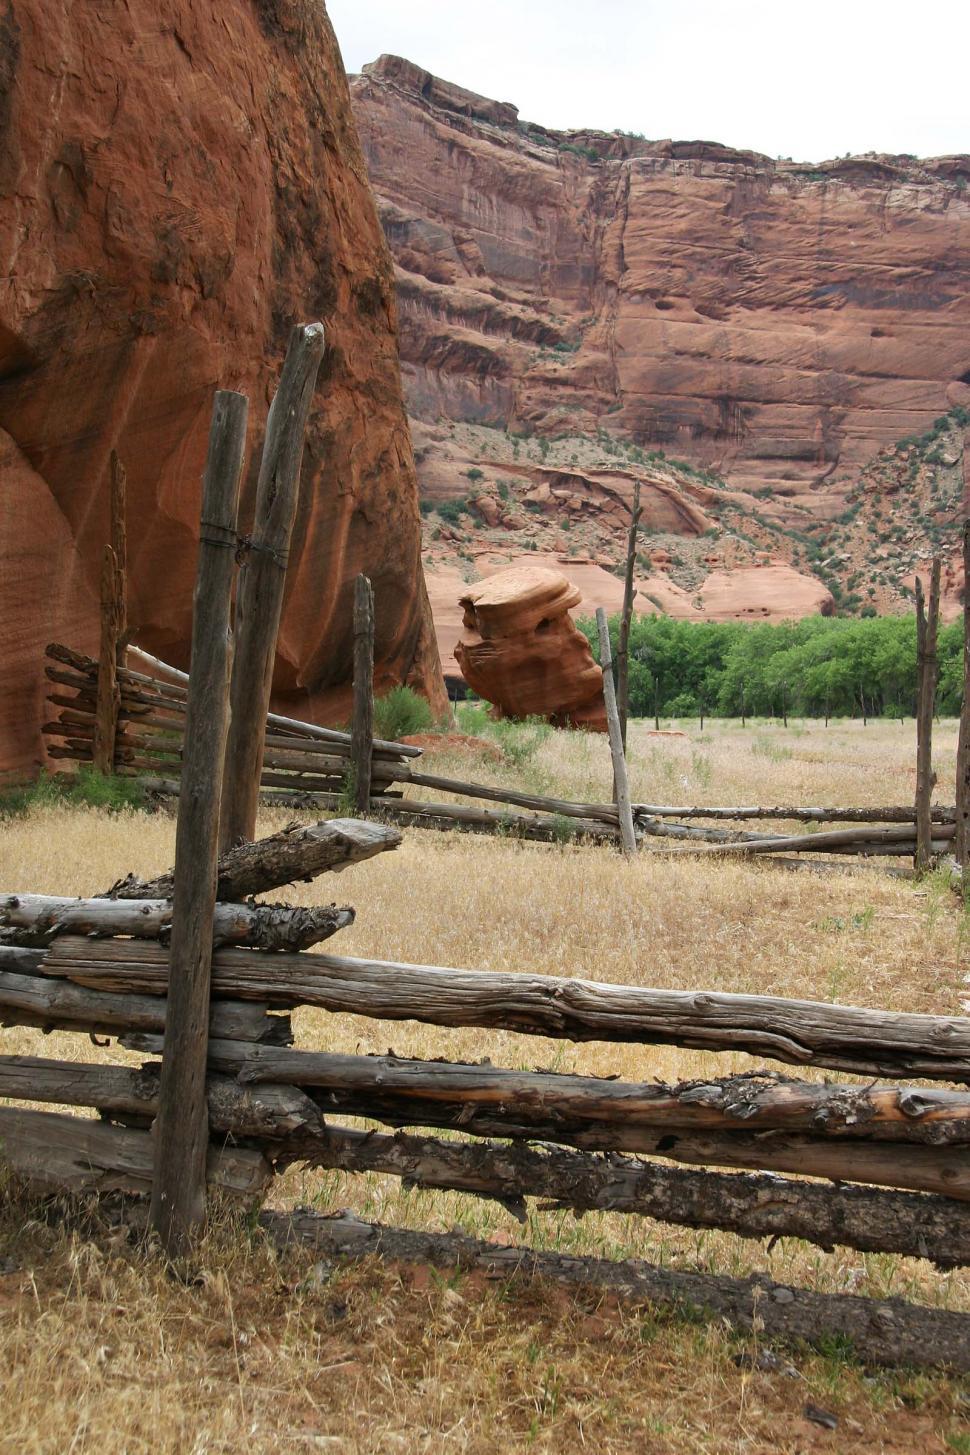 Free Image of cliff cliffs canyon de chelly chelly canyon de arizona indian native american monument national navajo southwest log rail fence corral grass dried weeds post ranch 